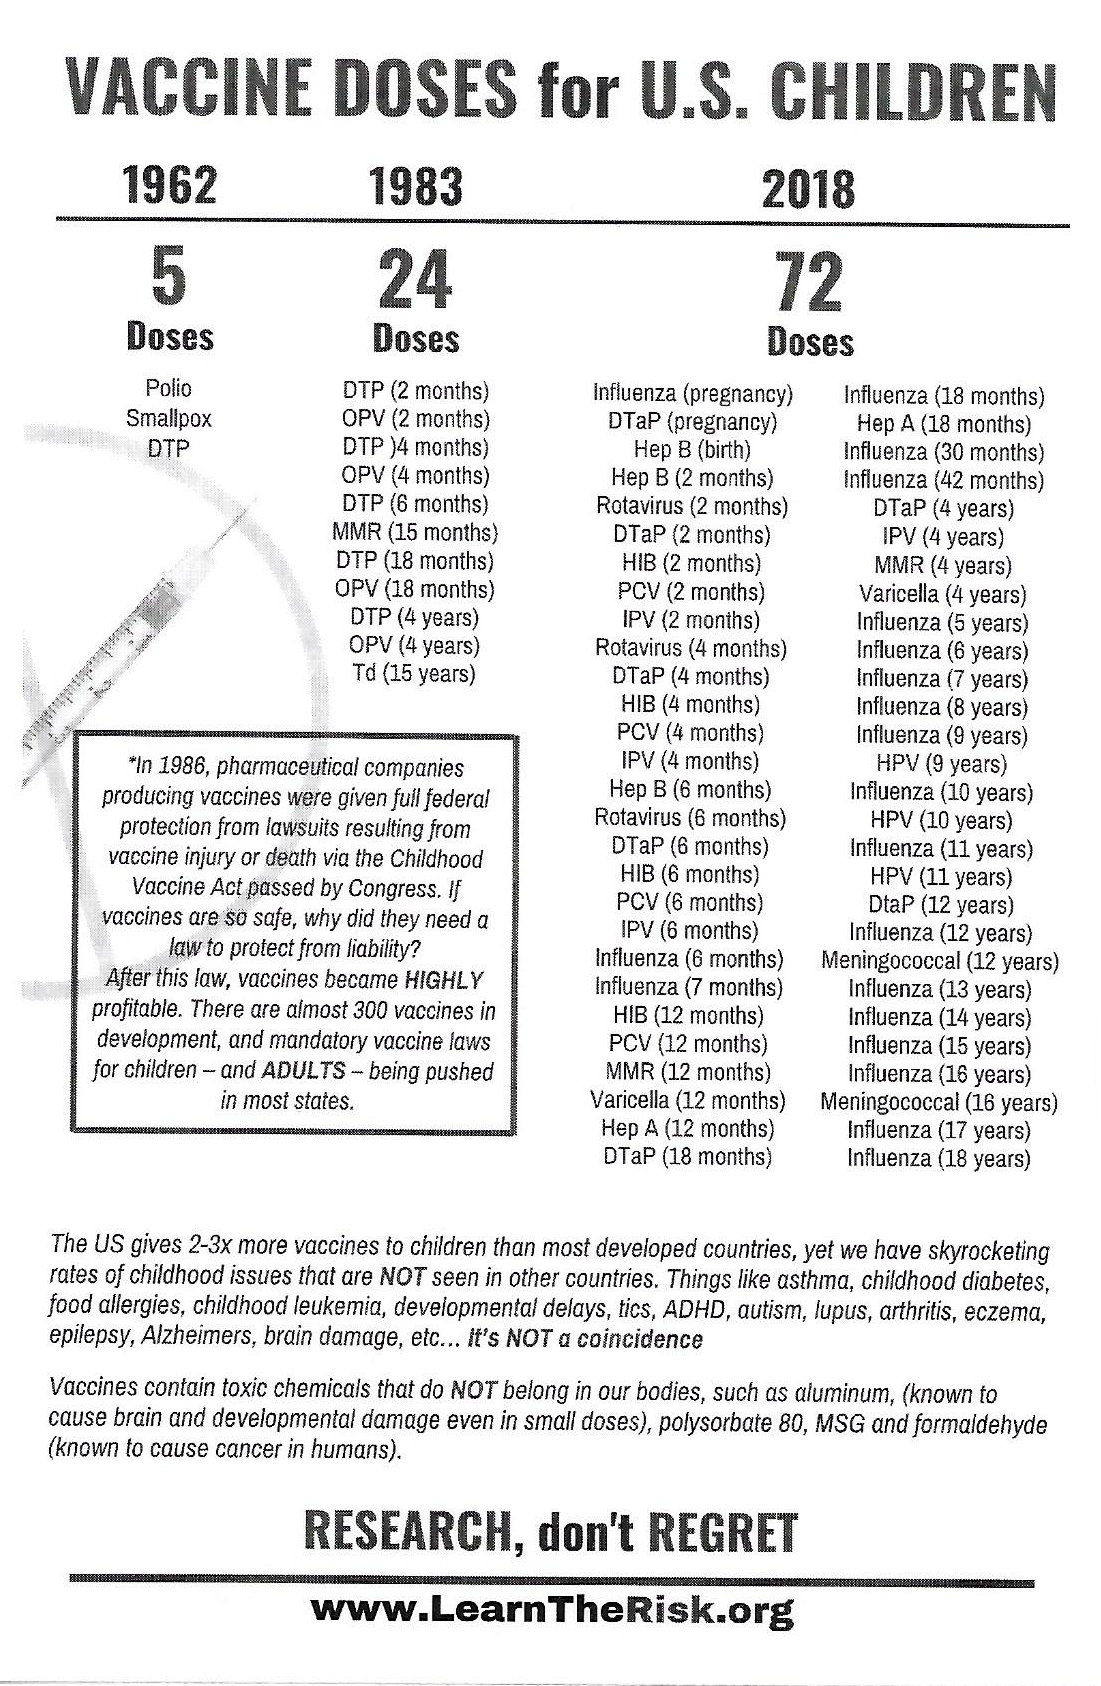 Vaccines Doses for Children